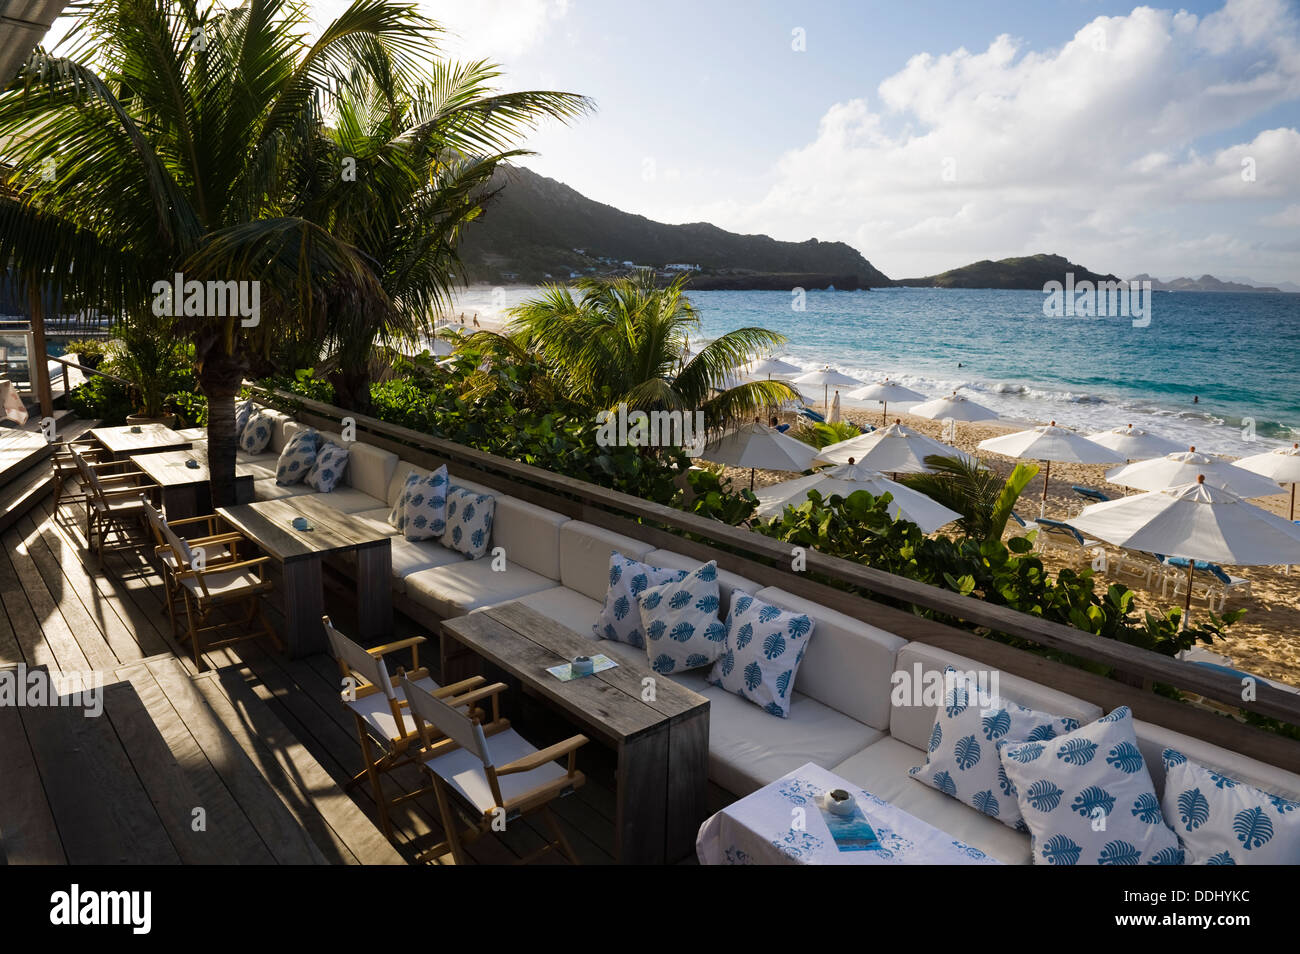 Cocktail lounge / restaurant with beach views and palm trees Stock Photo